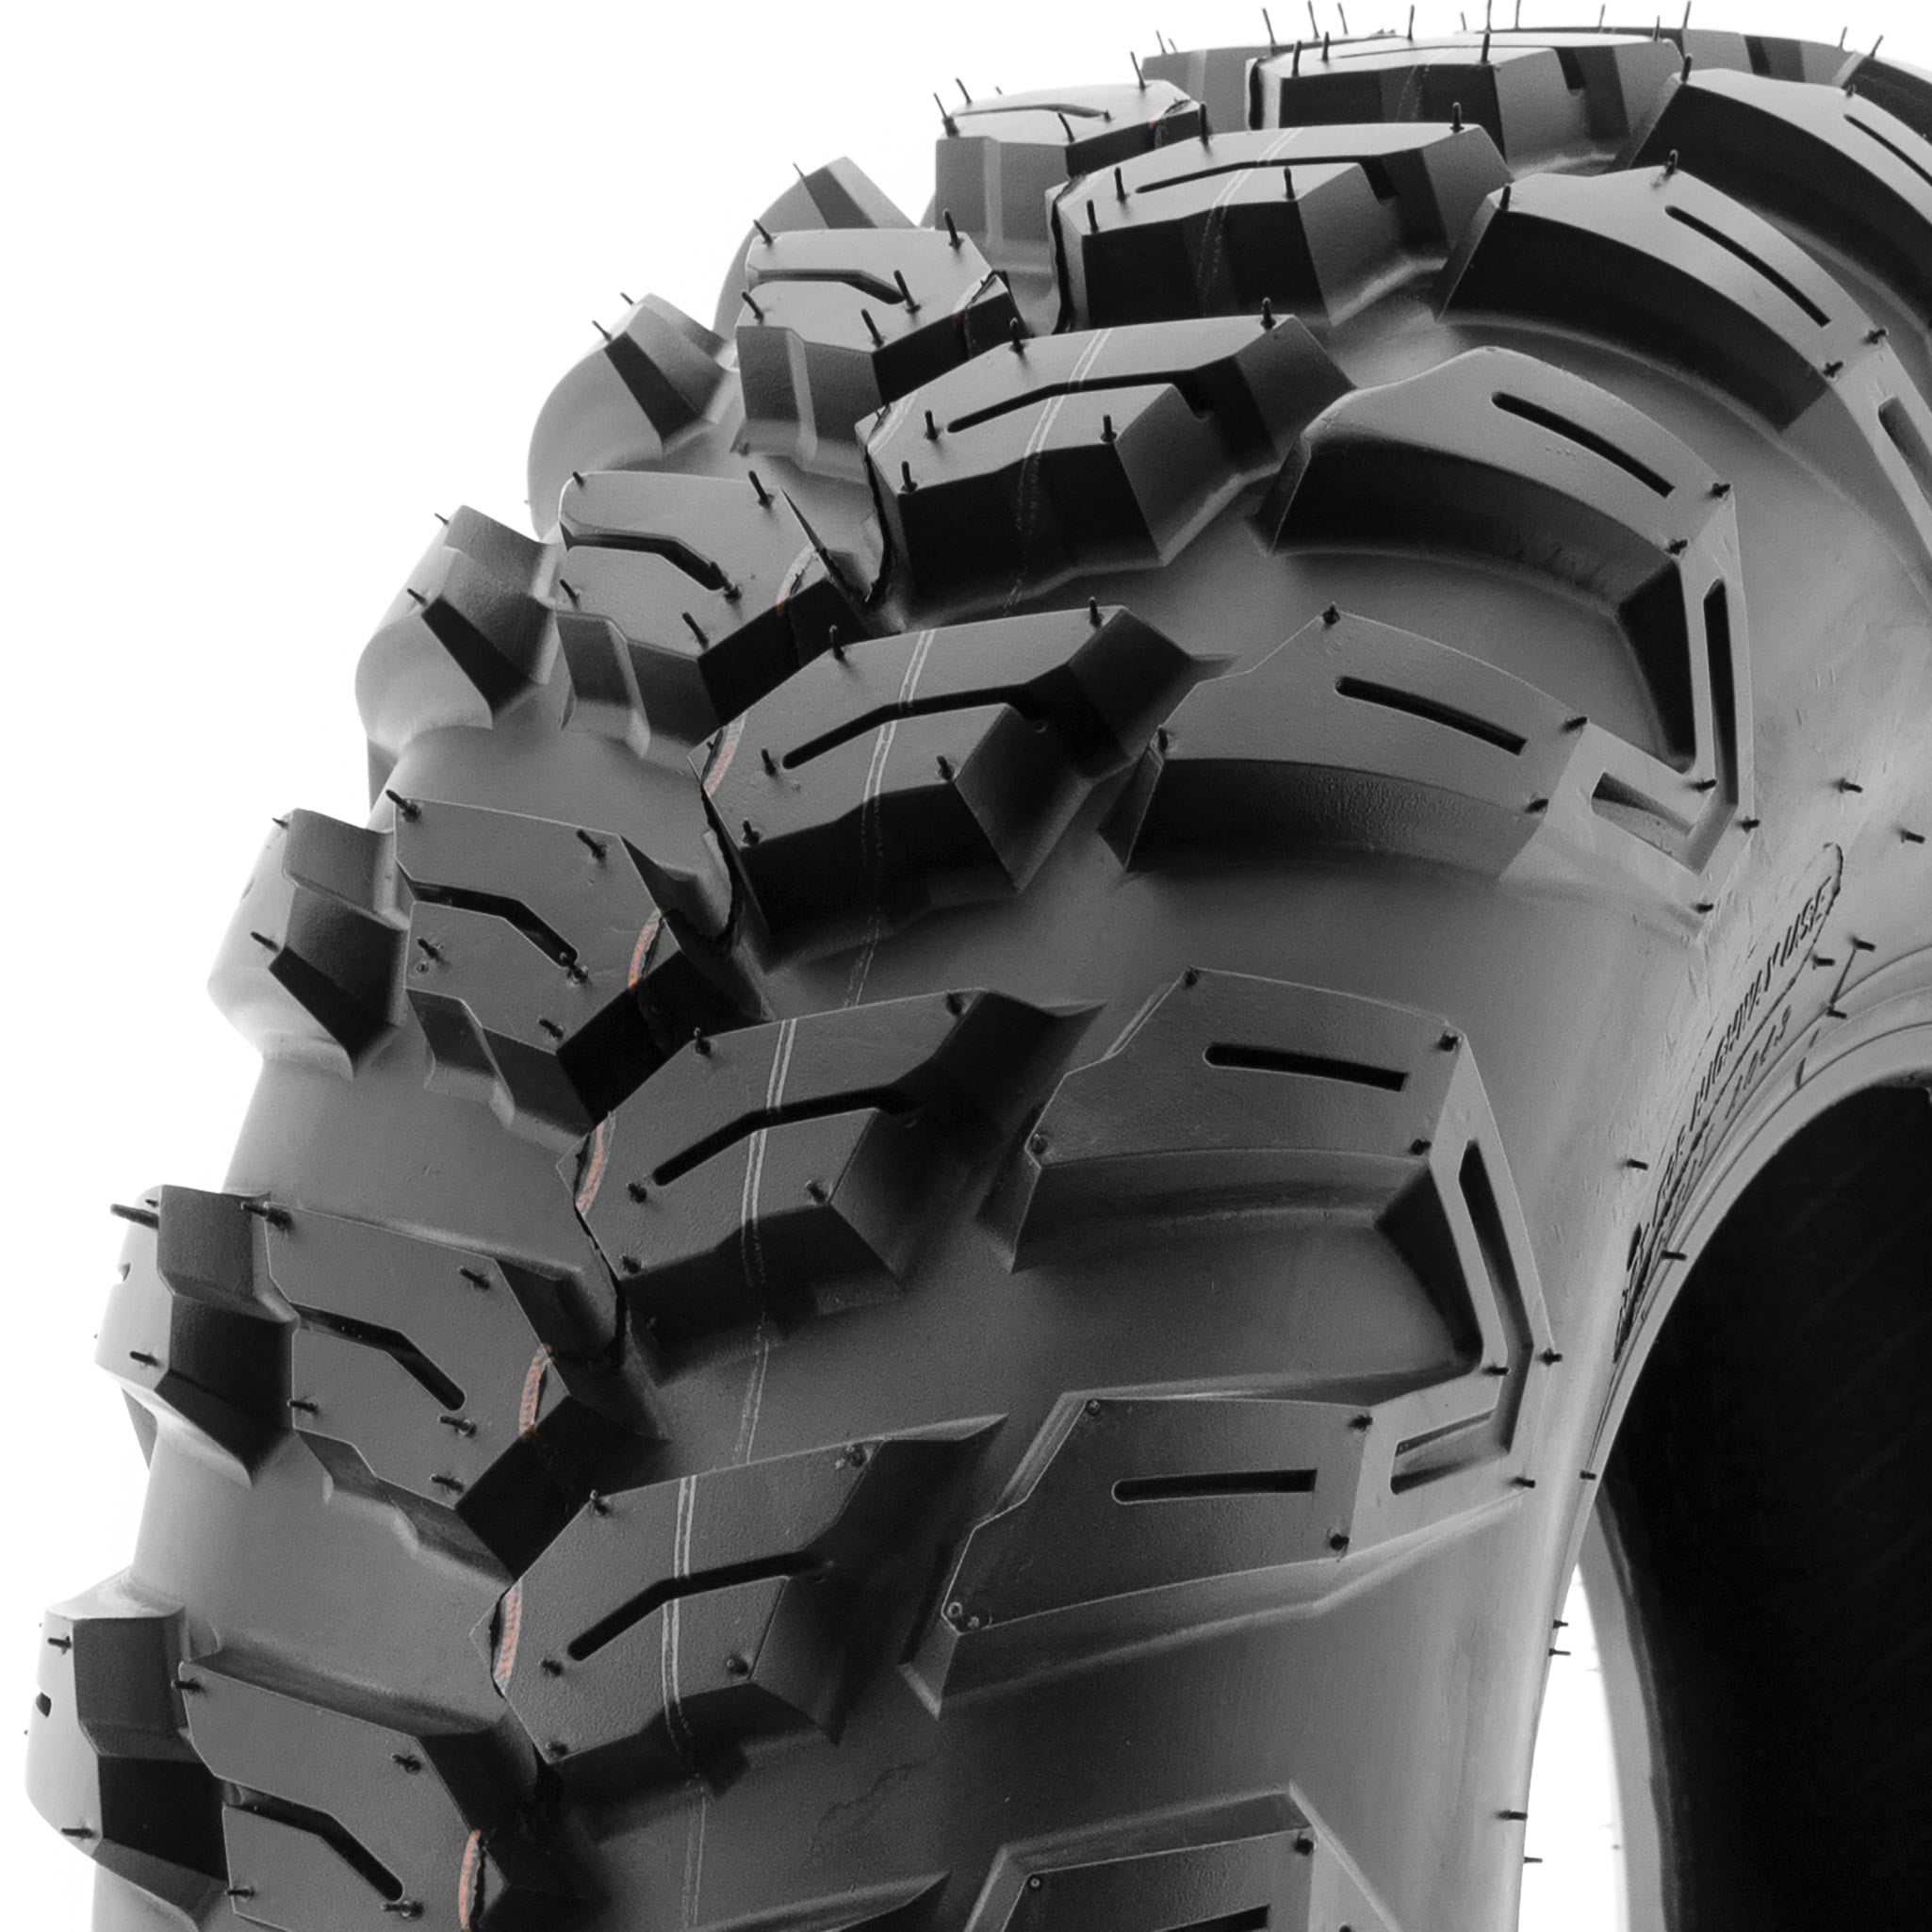 Set of 4 SunF Radial Race Replacement ALL TERRAIN ATV UTV 6 Ply Tires 25x8R12 25x8x12 Tubeless A043, 